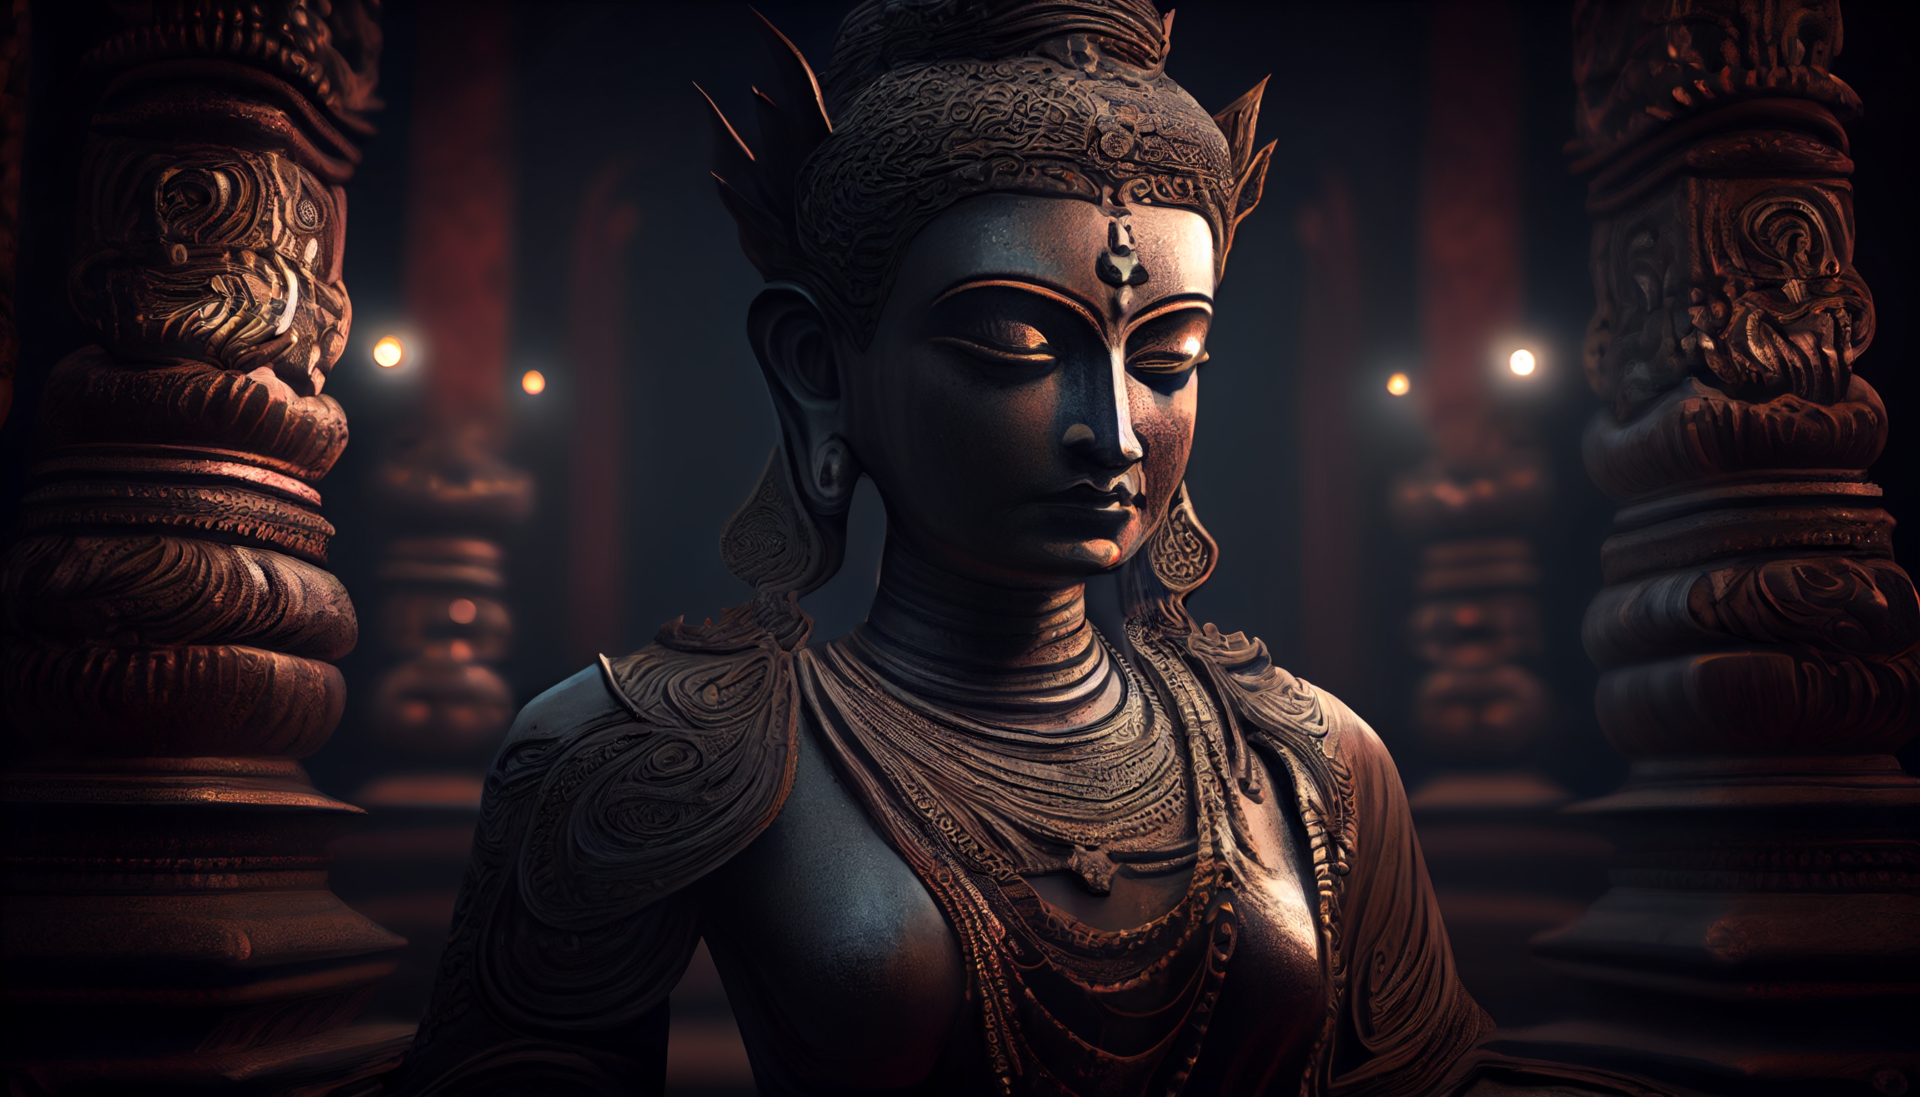 Transform Your Screen with Buddha Meditation Backgrounds